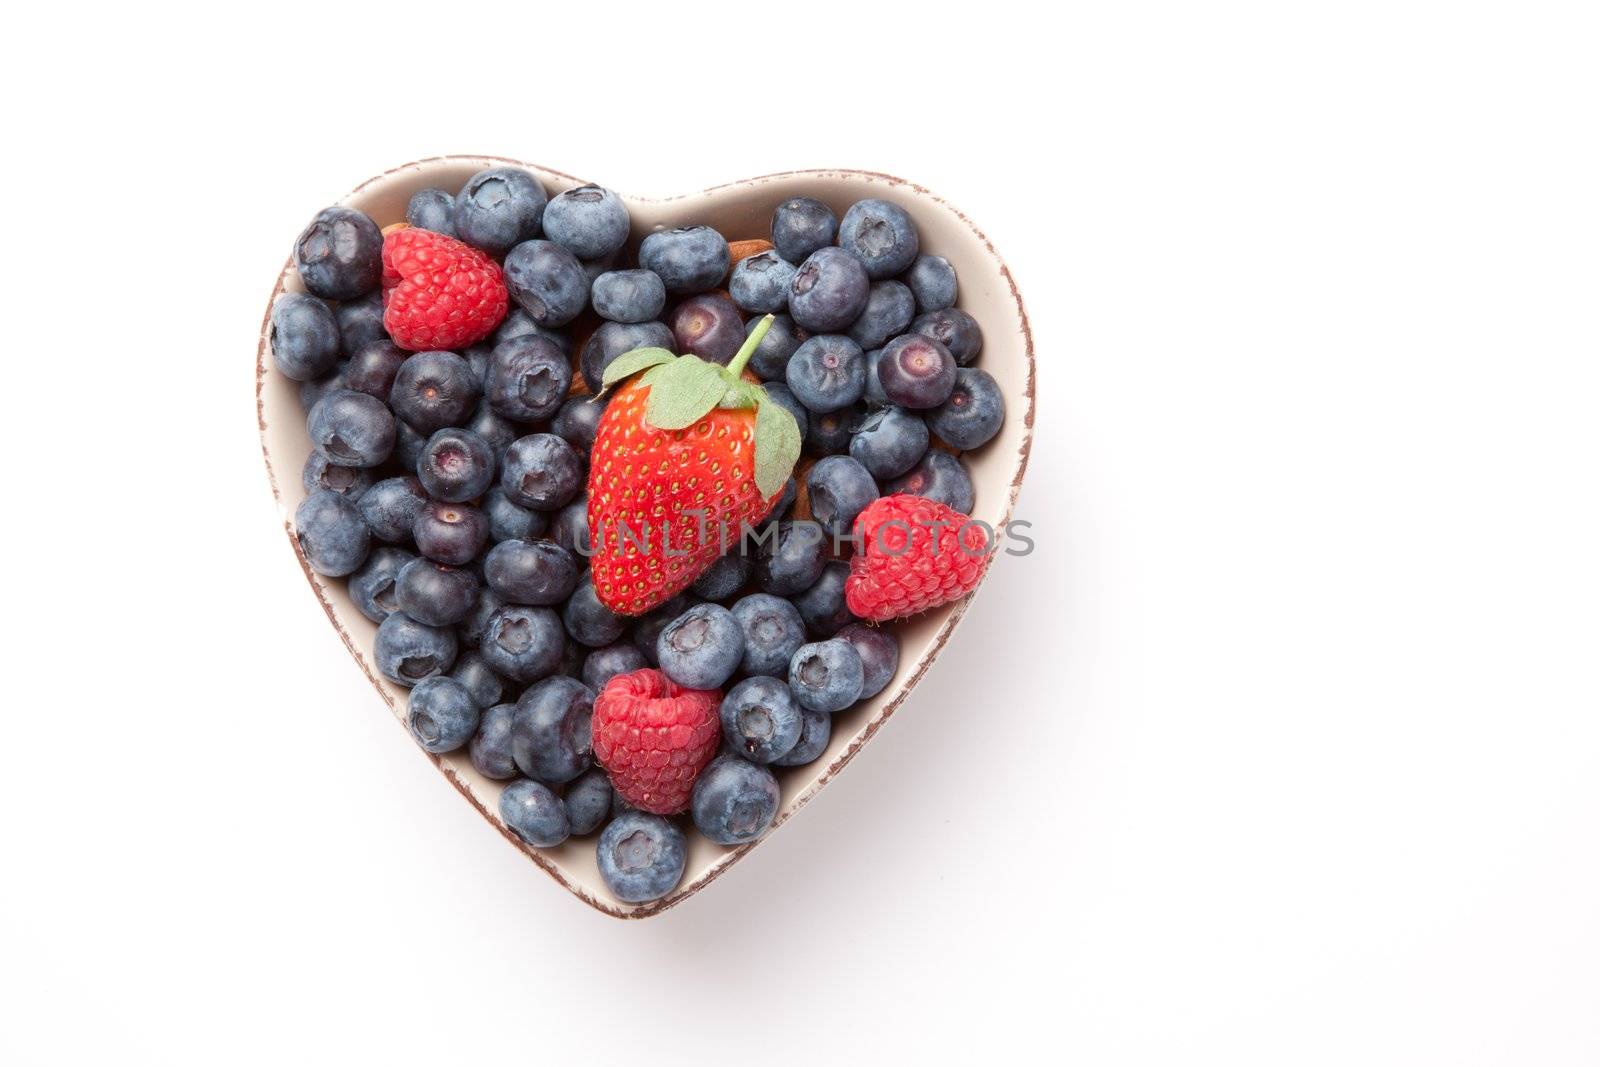 Different berries in  a heart shaped bowl against a white background